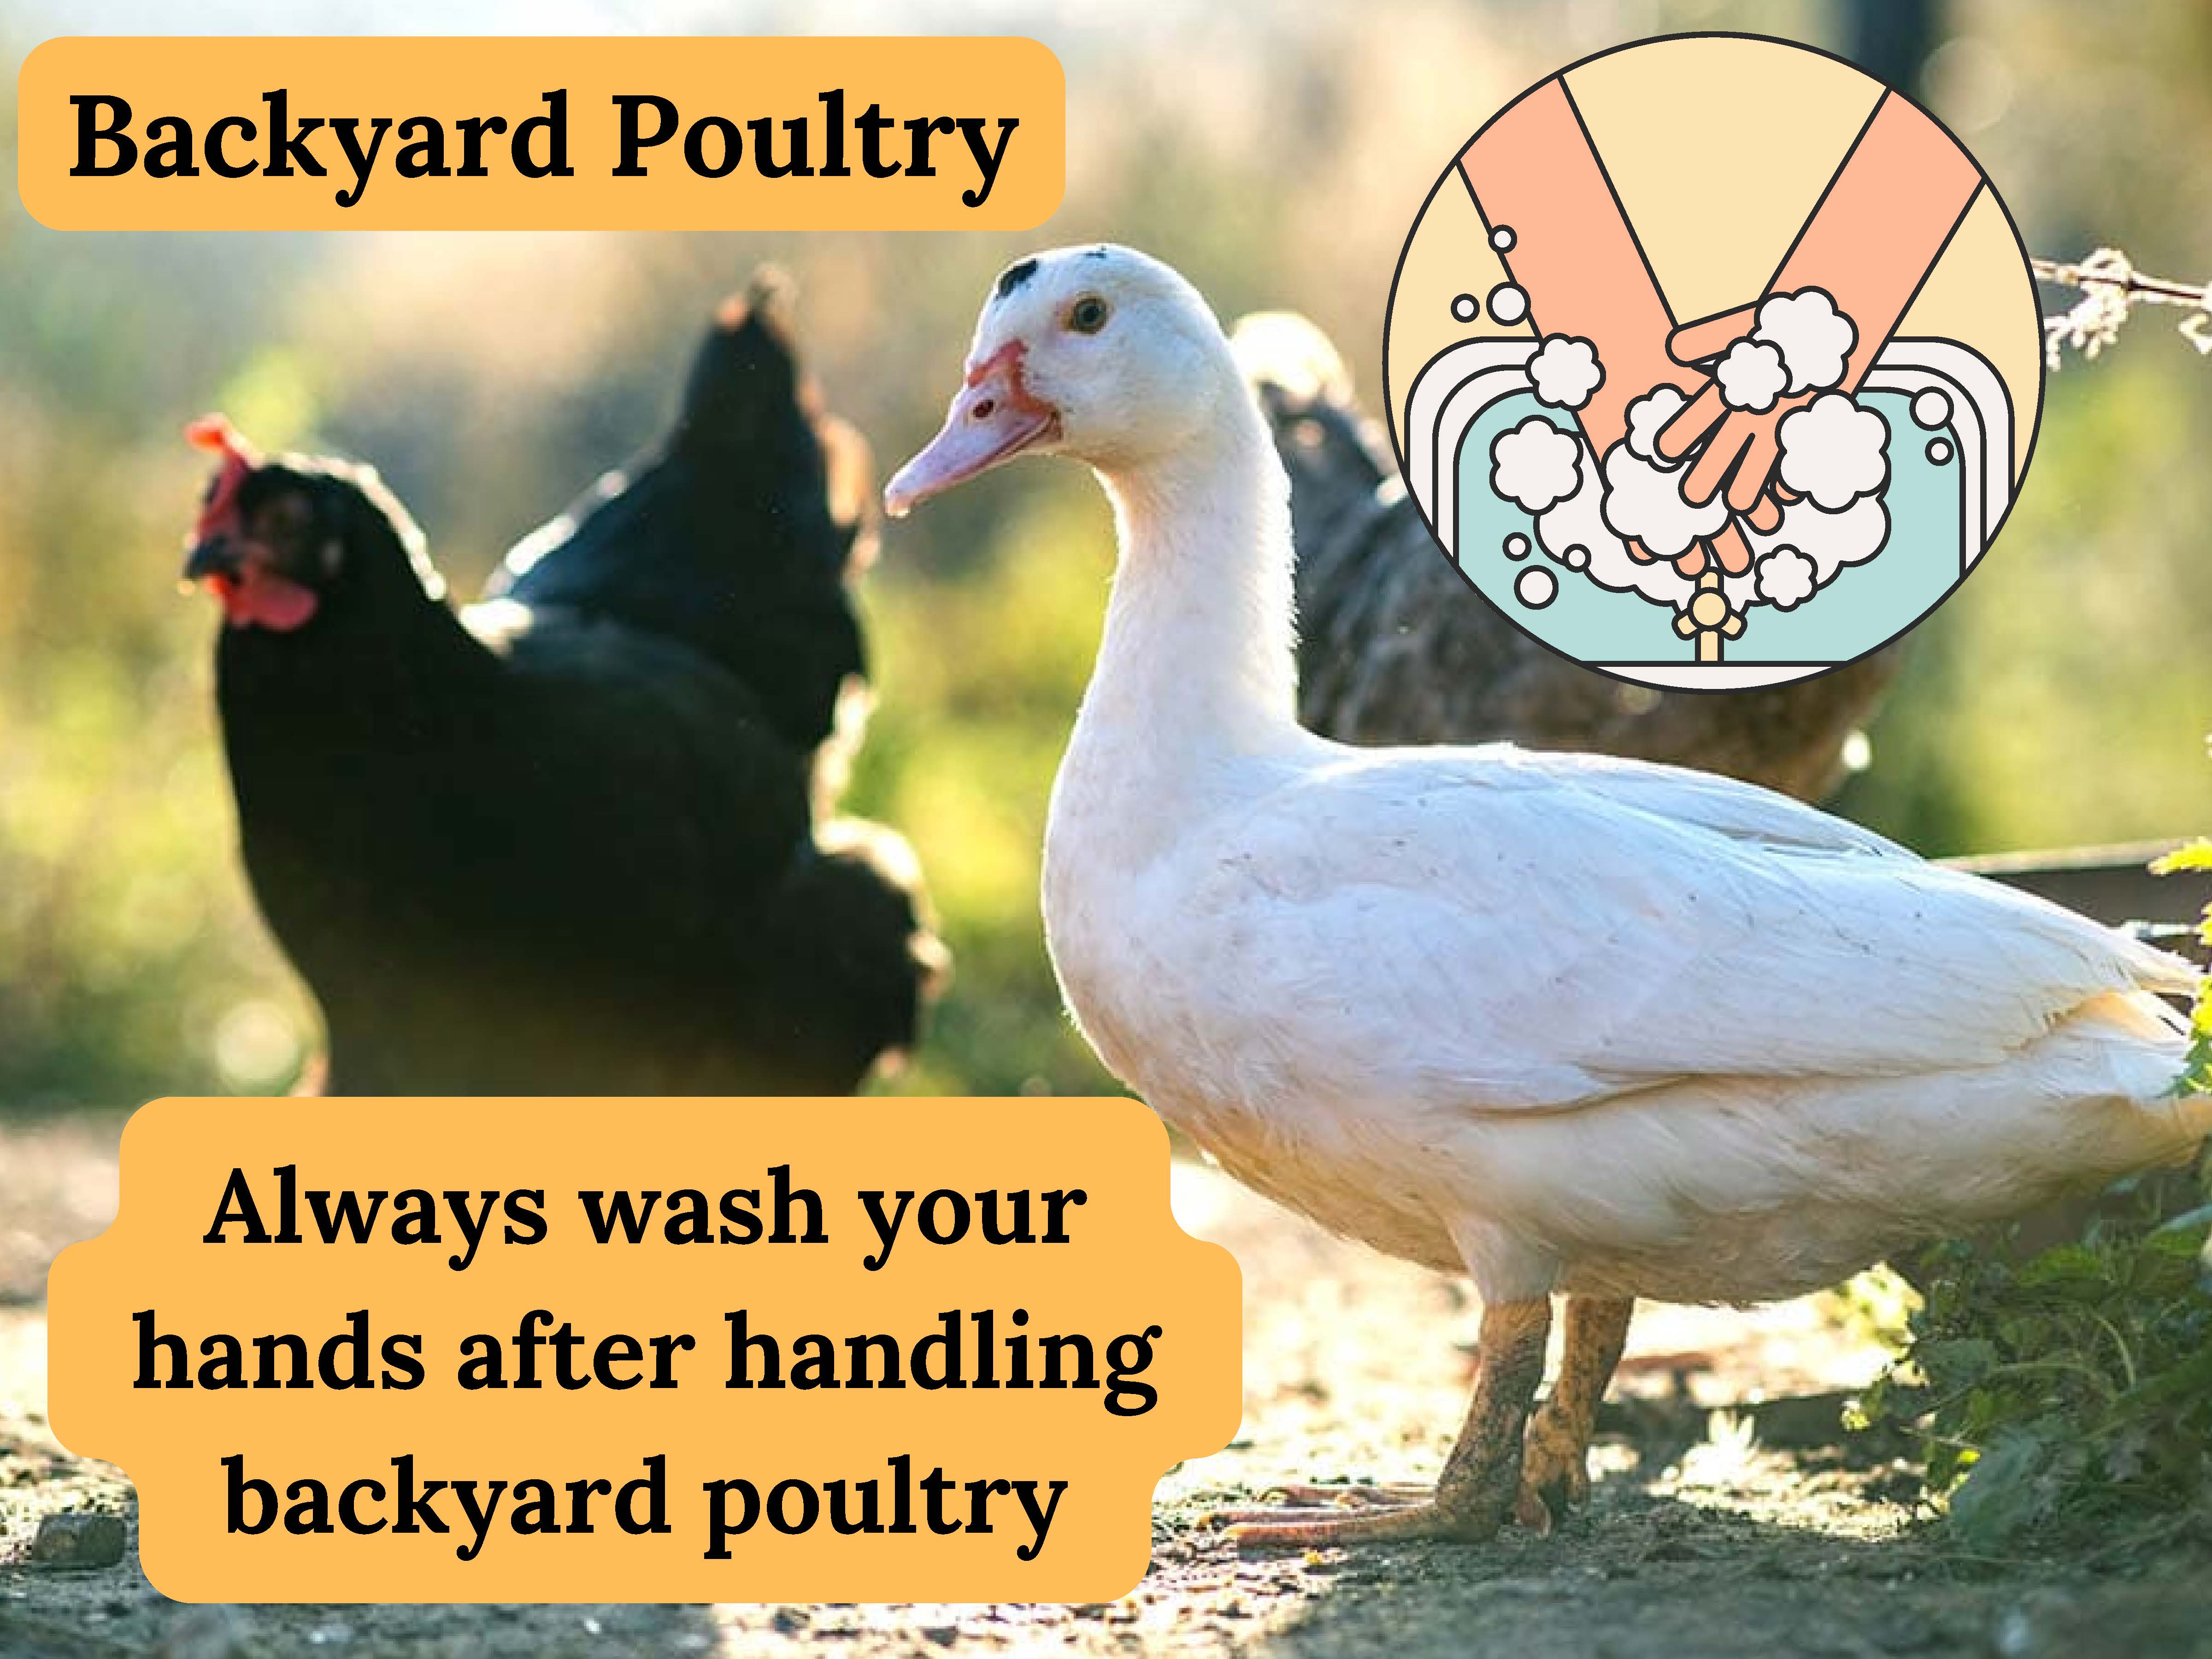 Always wash your hands after handling backyard poultry.